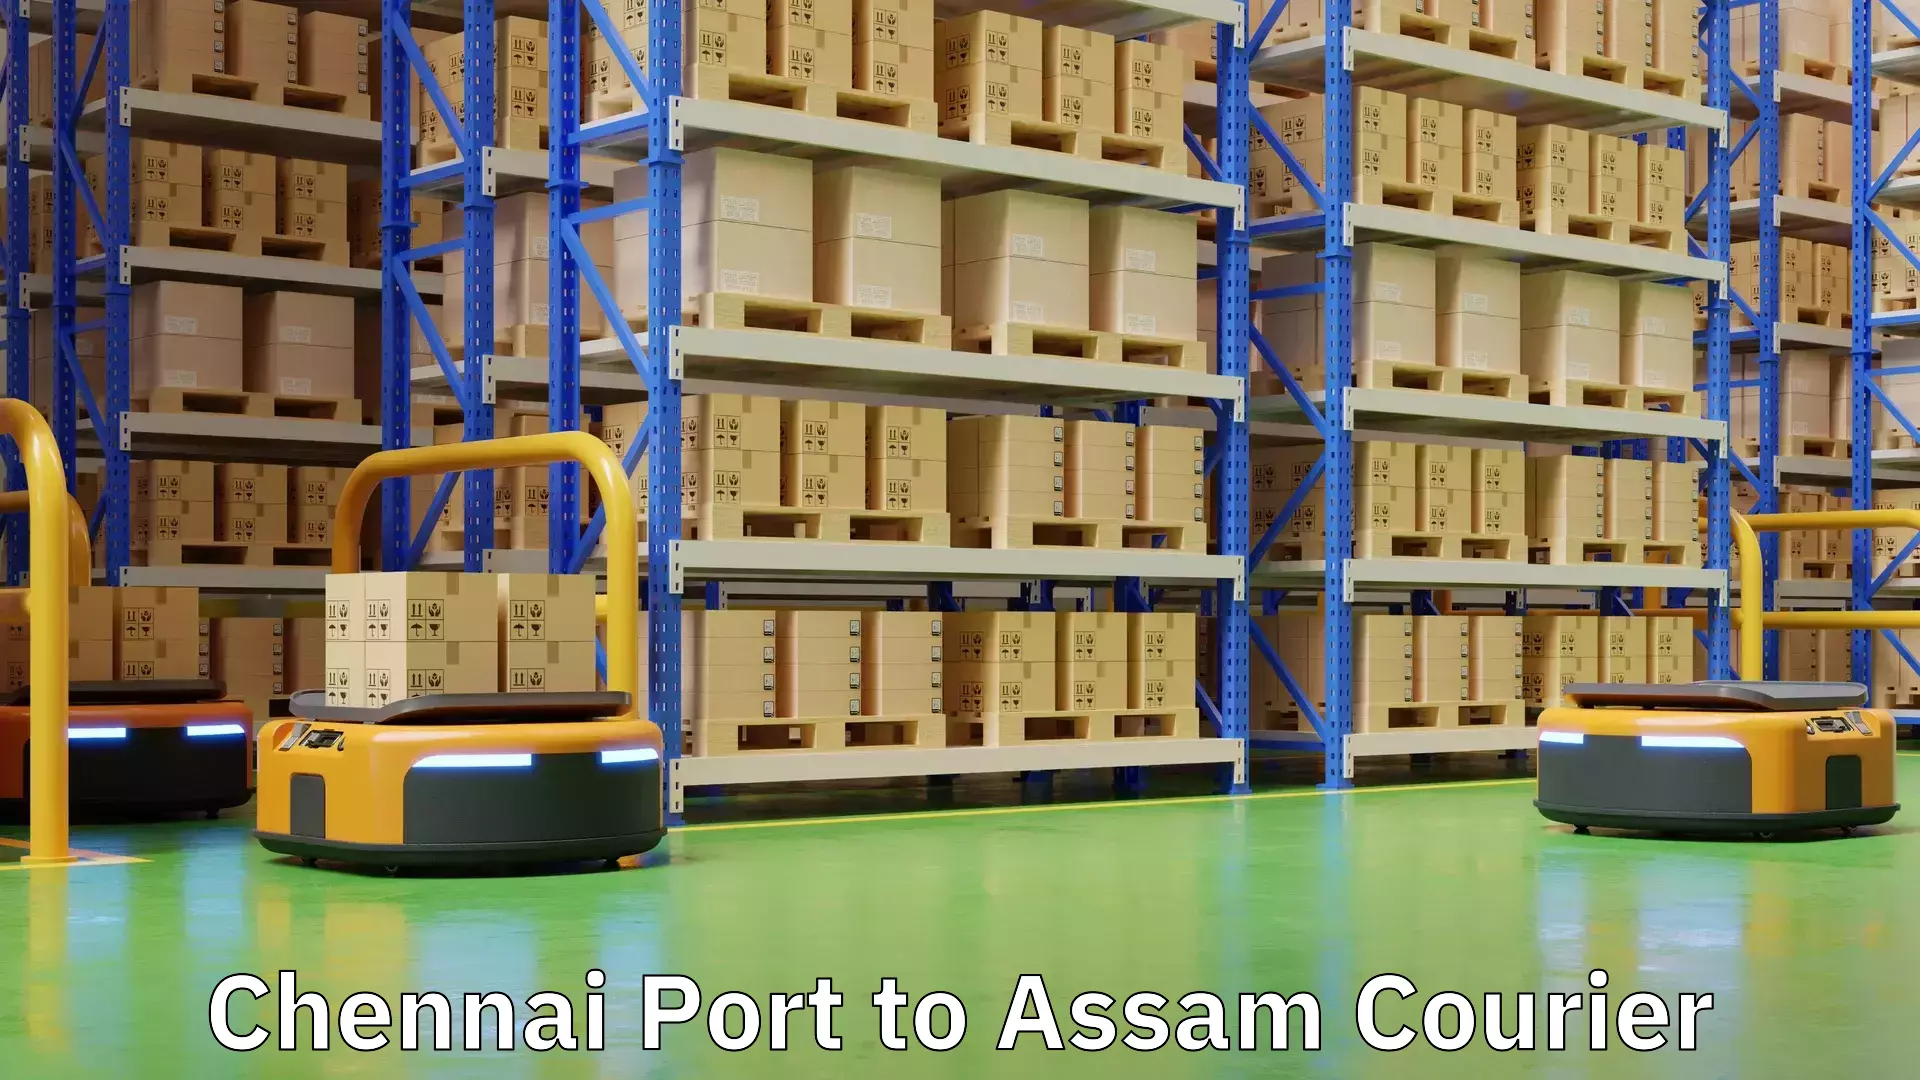 Online courier booking Chennai Port to Assam